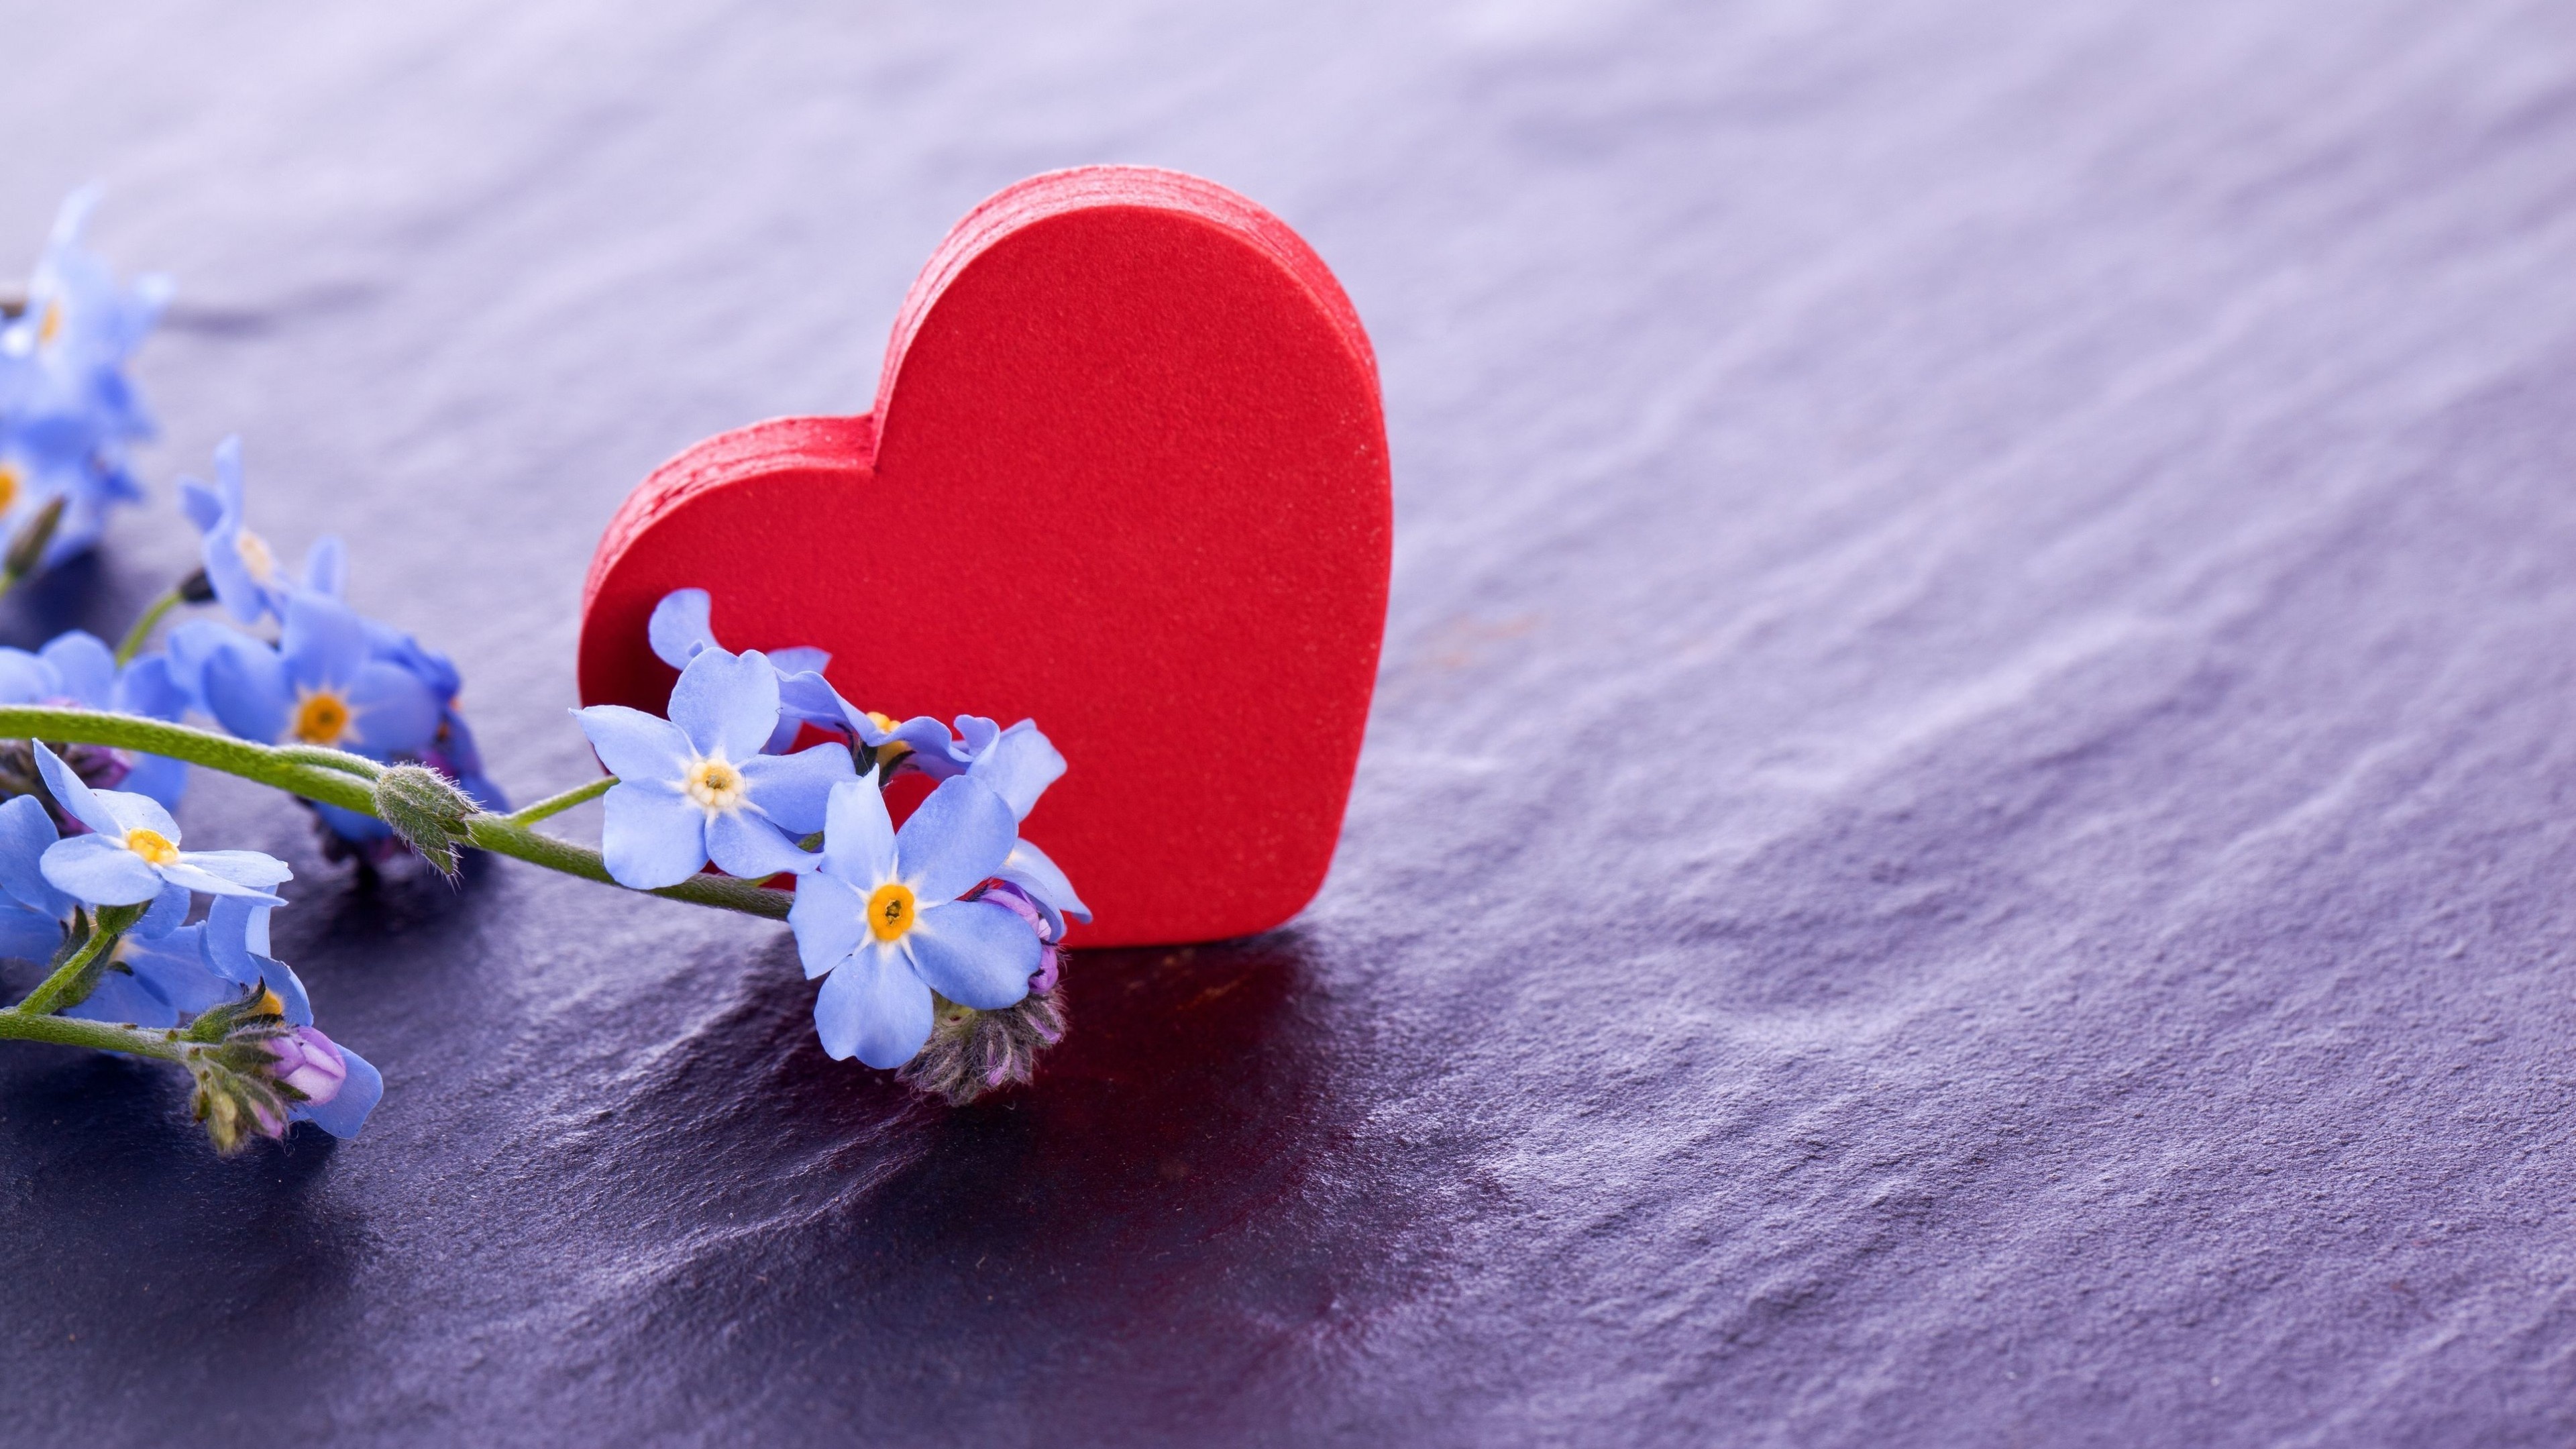 Valentine's Day, Love-filled wallpaper, Heart and flowers, Romantic holiday, 3840x2160 4K Desktop